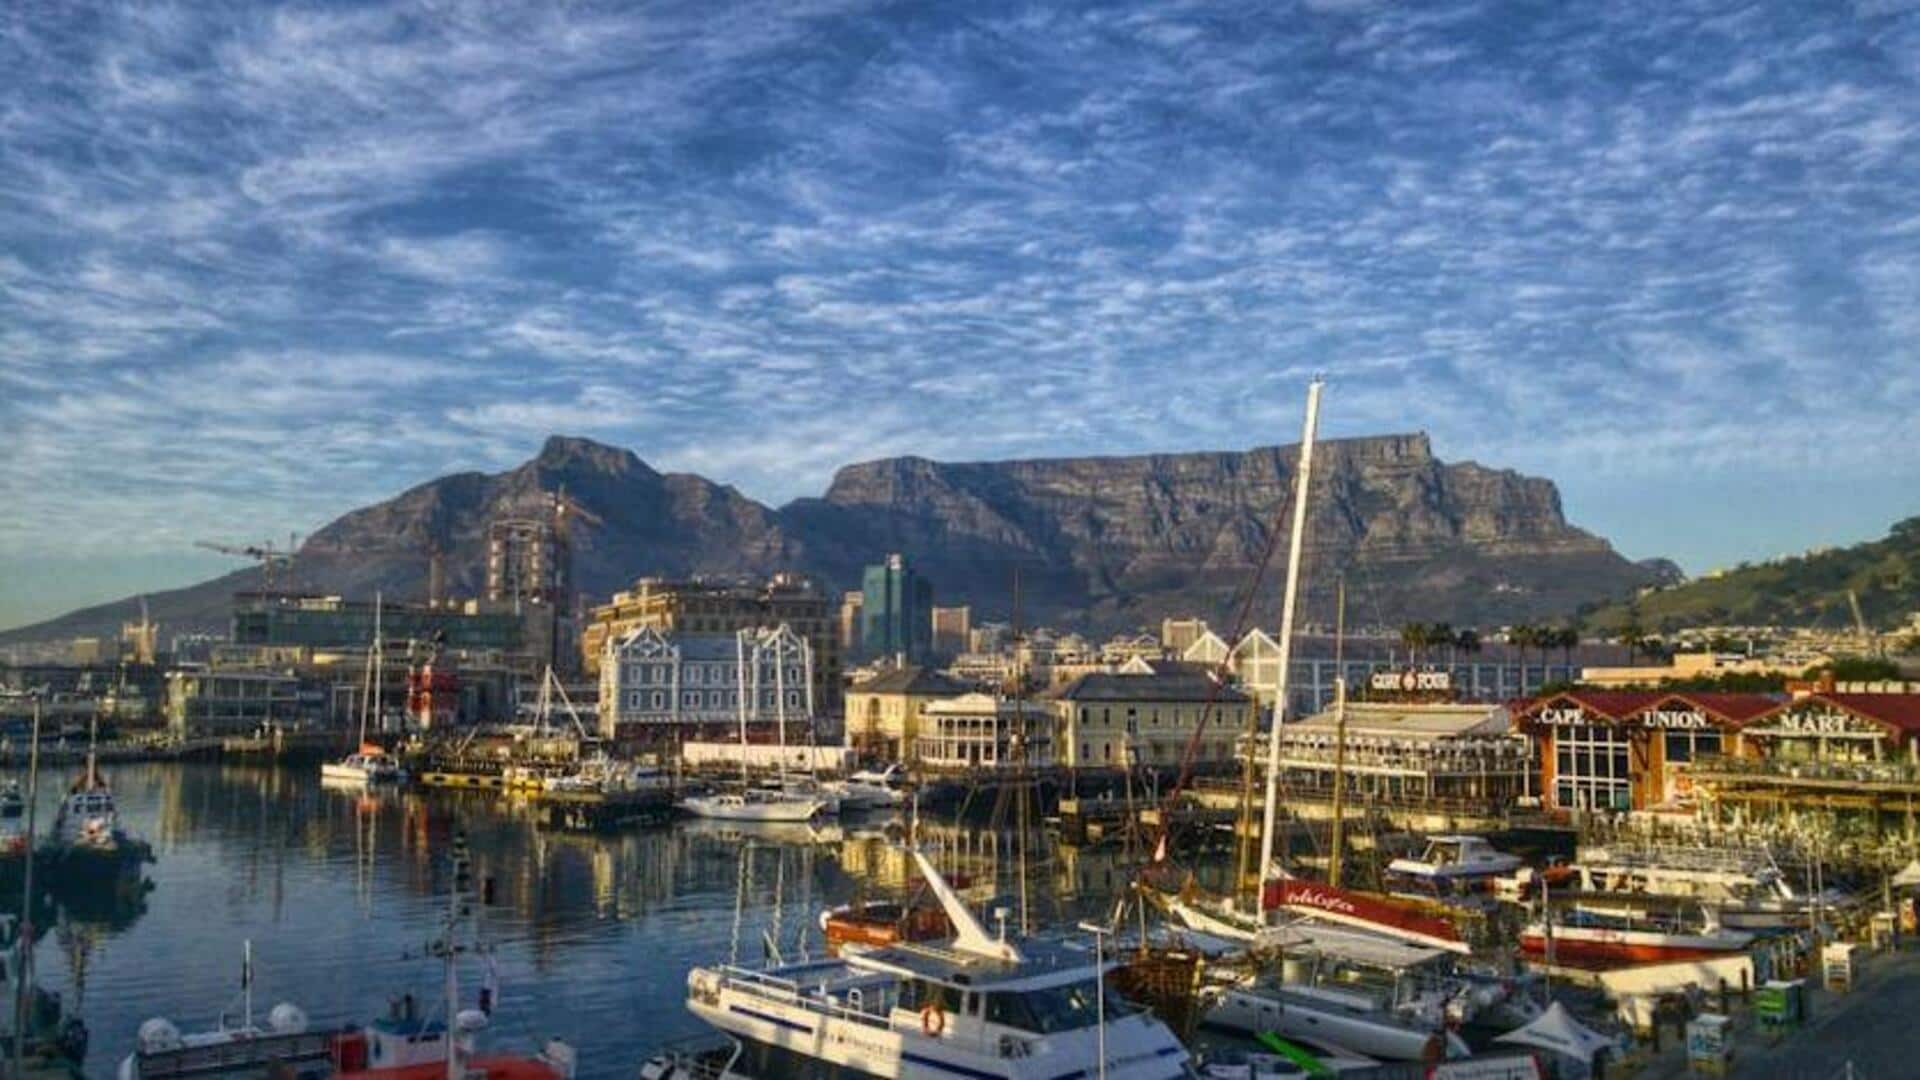 Explore Cape Town's townships with this travel guide